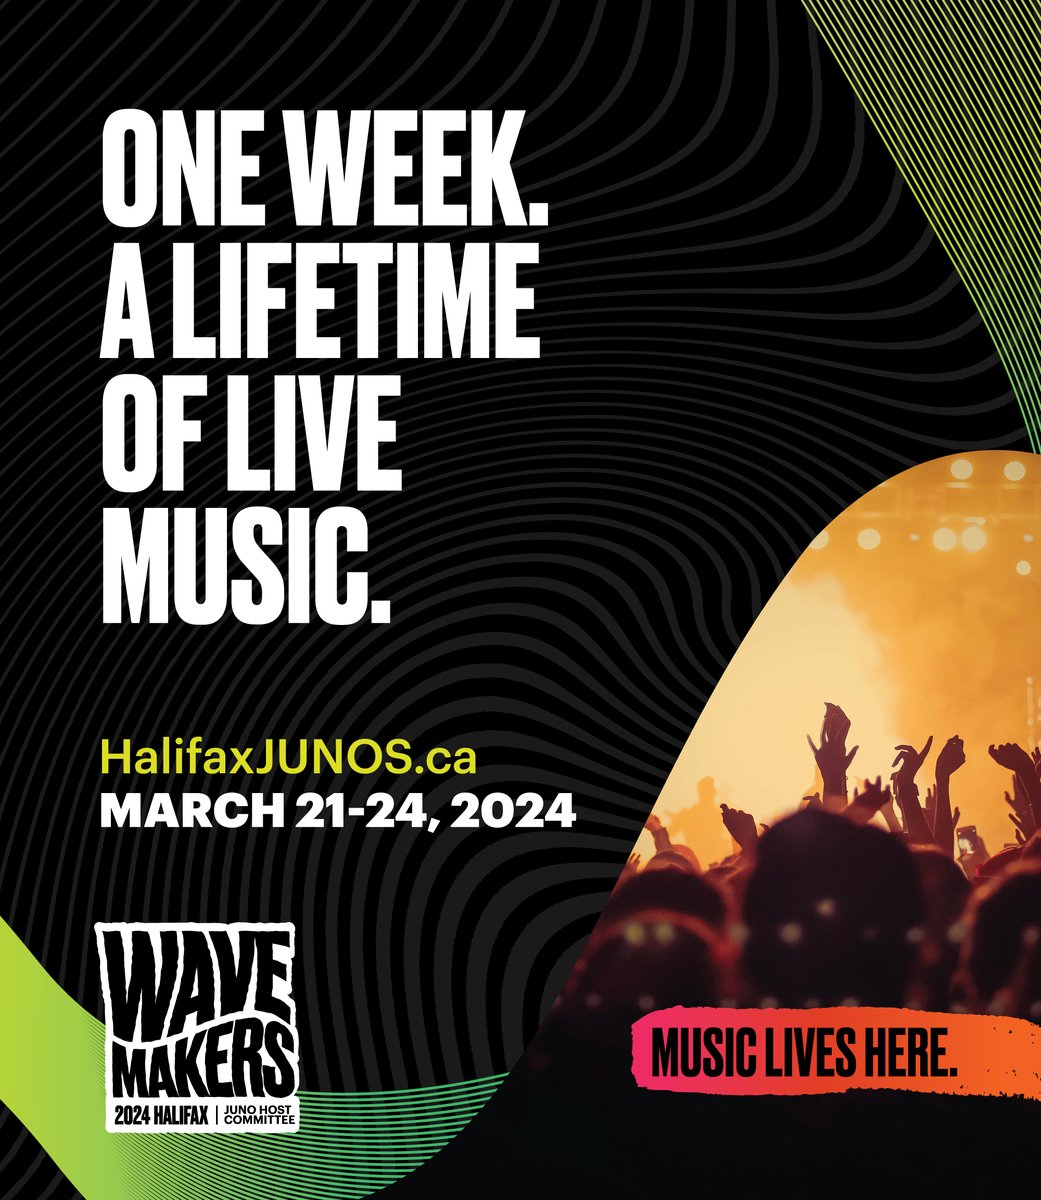 JUNO Week is finally here and it's going to be an exciting time in Halifax! While some events are free, some require advance ticket purchase to attend. Don't be disappointed, check out the link below to find schedule and ticket information⬇️ discoverhalifaxns.com/events/everyth…